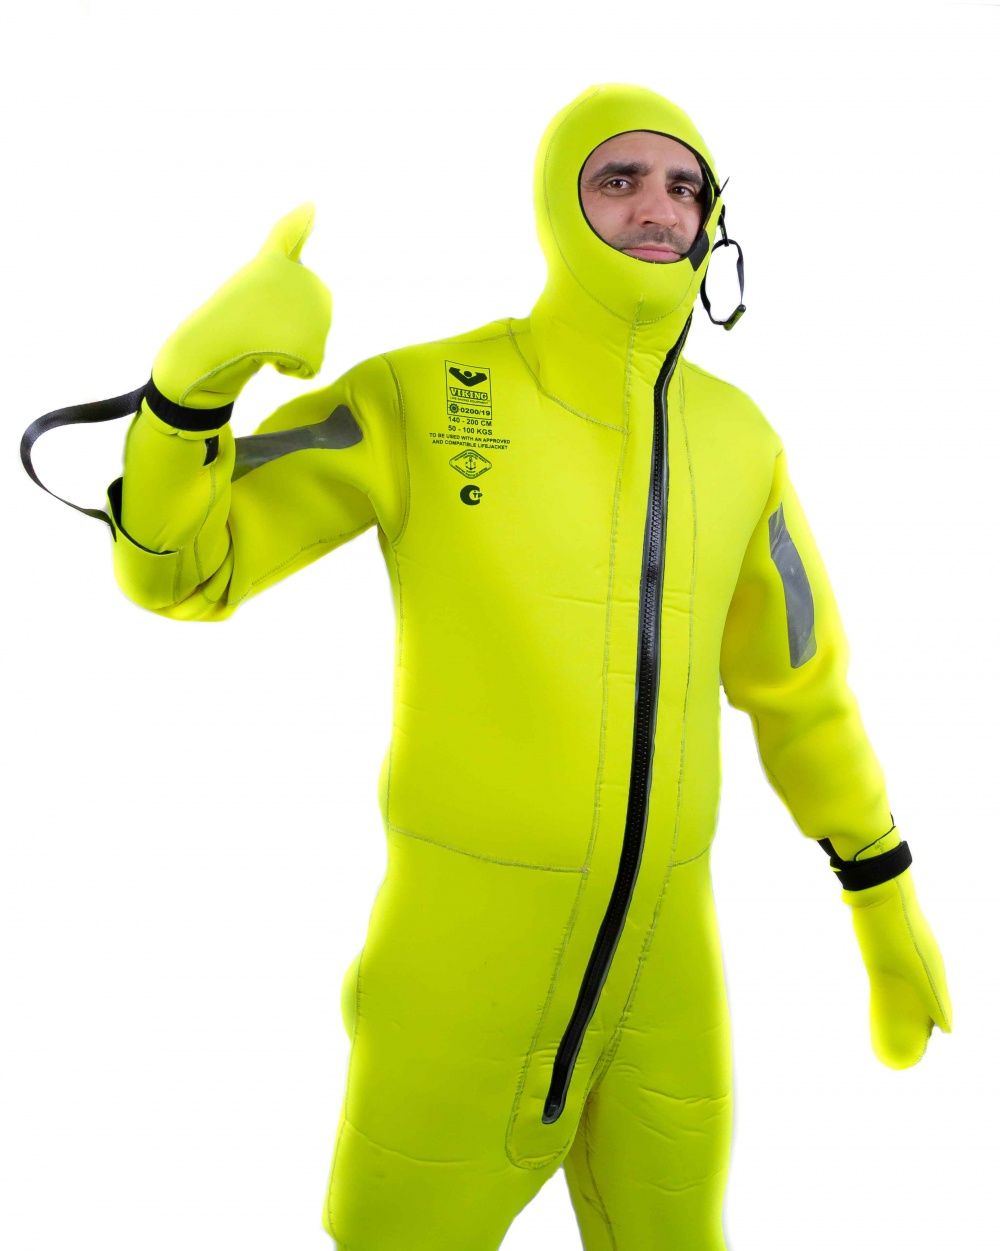 Maintenance and testing of immersion suits, antiexposure and thermal protection suits - 1